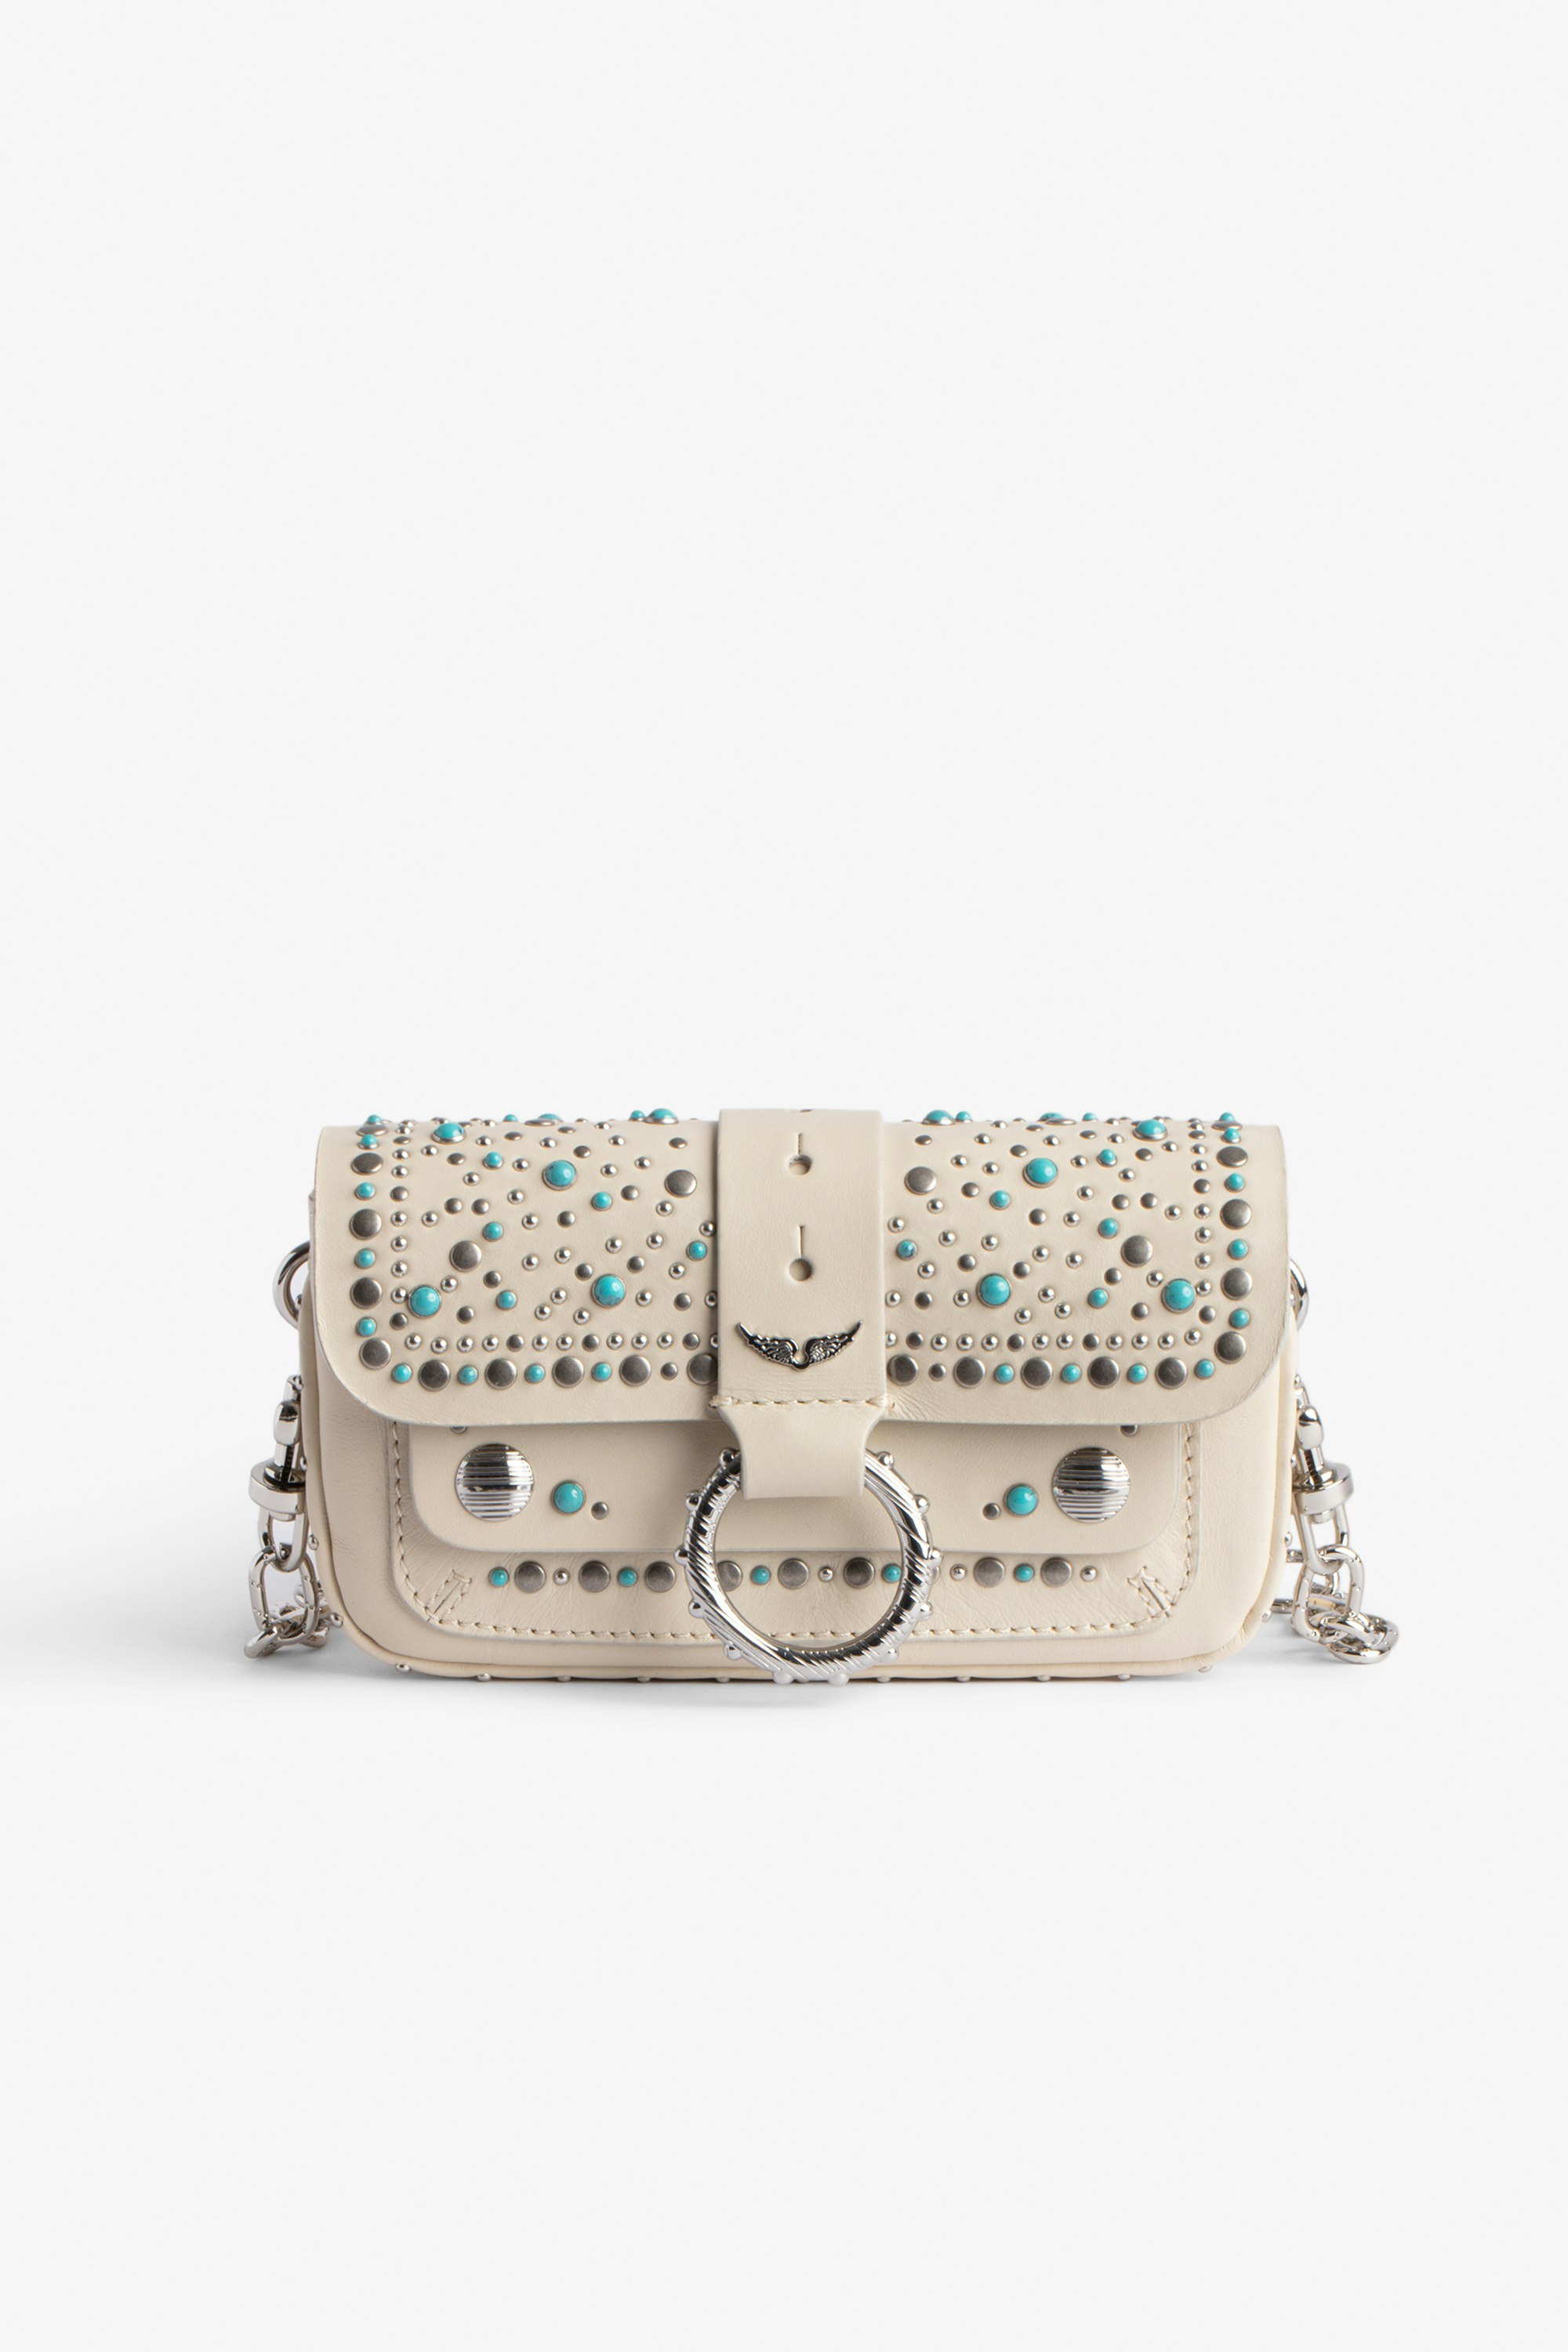 Kate Wallet Bag Women’s small bag in ecru leather studded with turquoise-blue stones